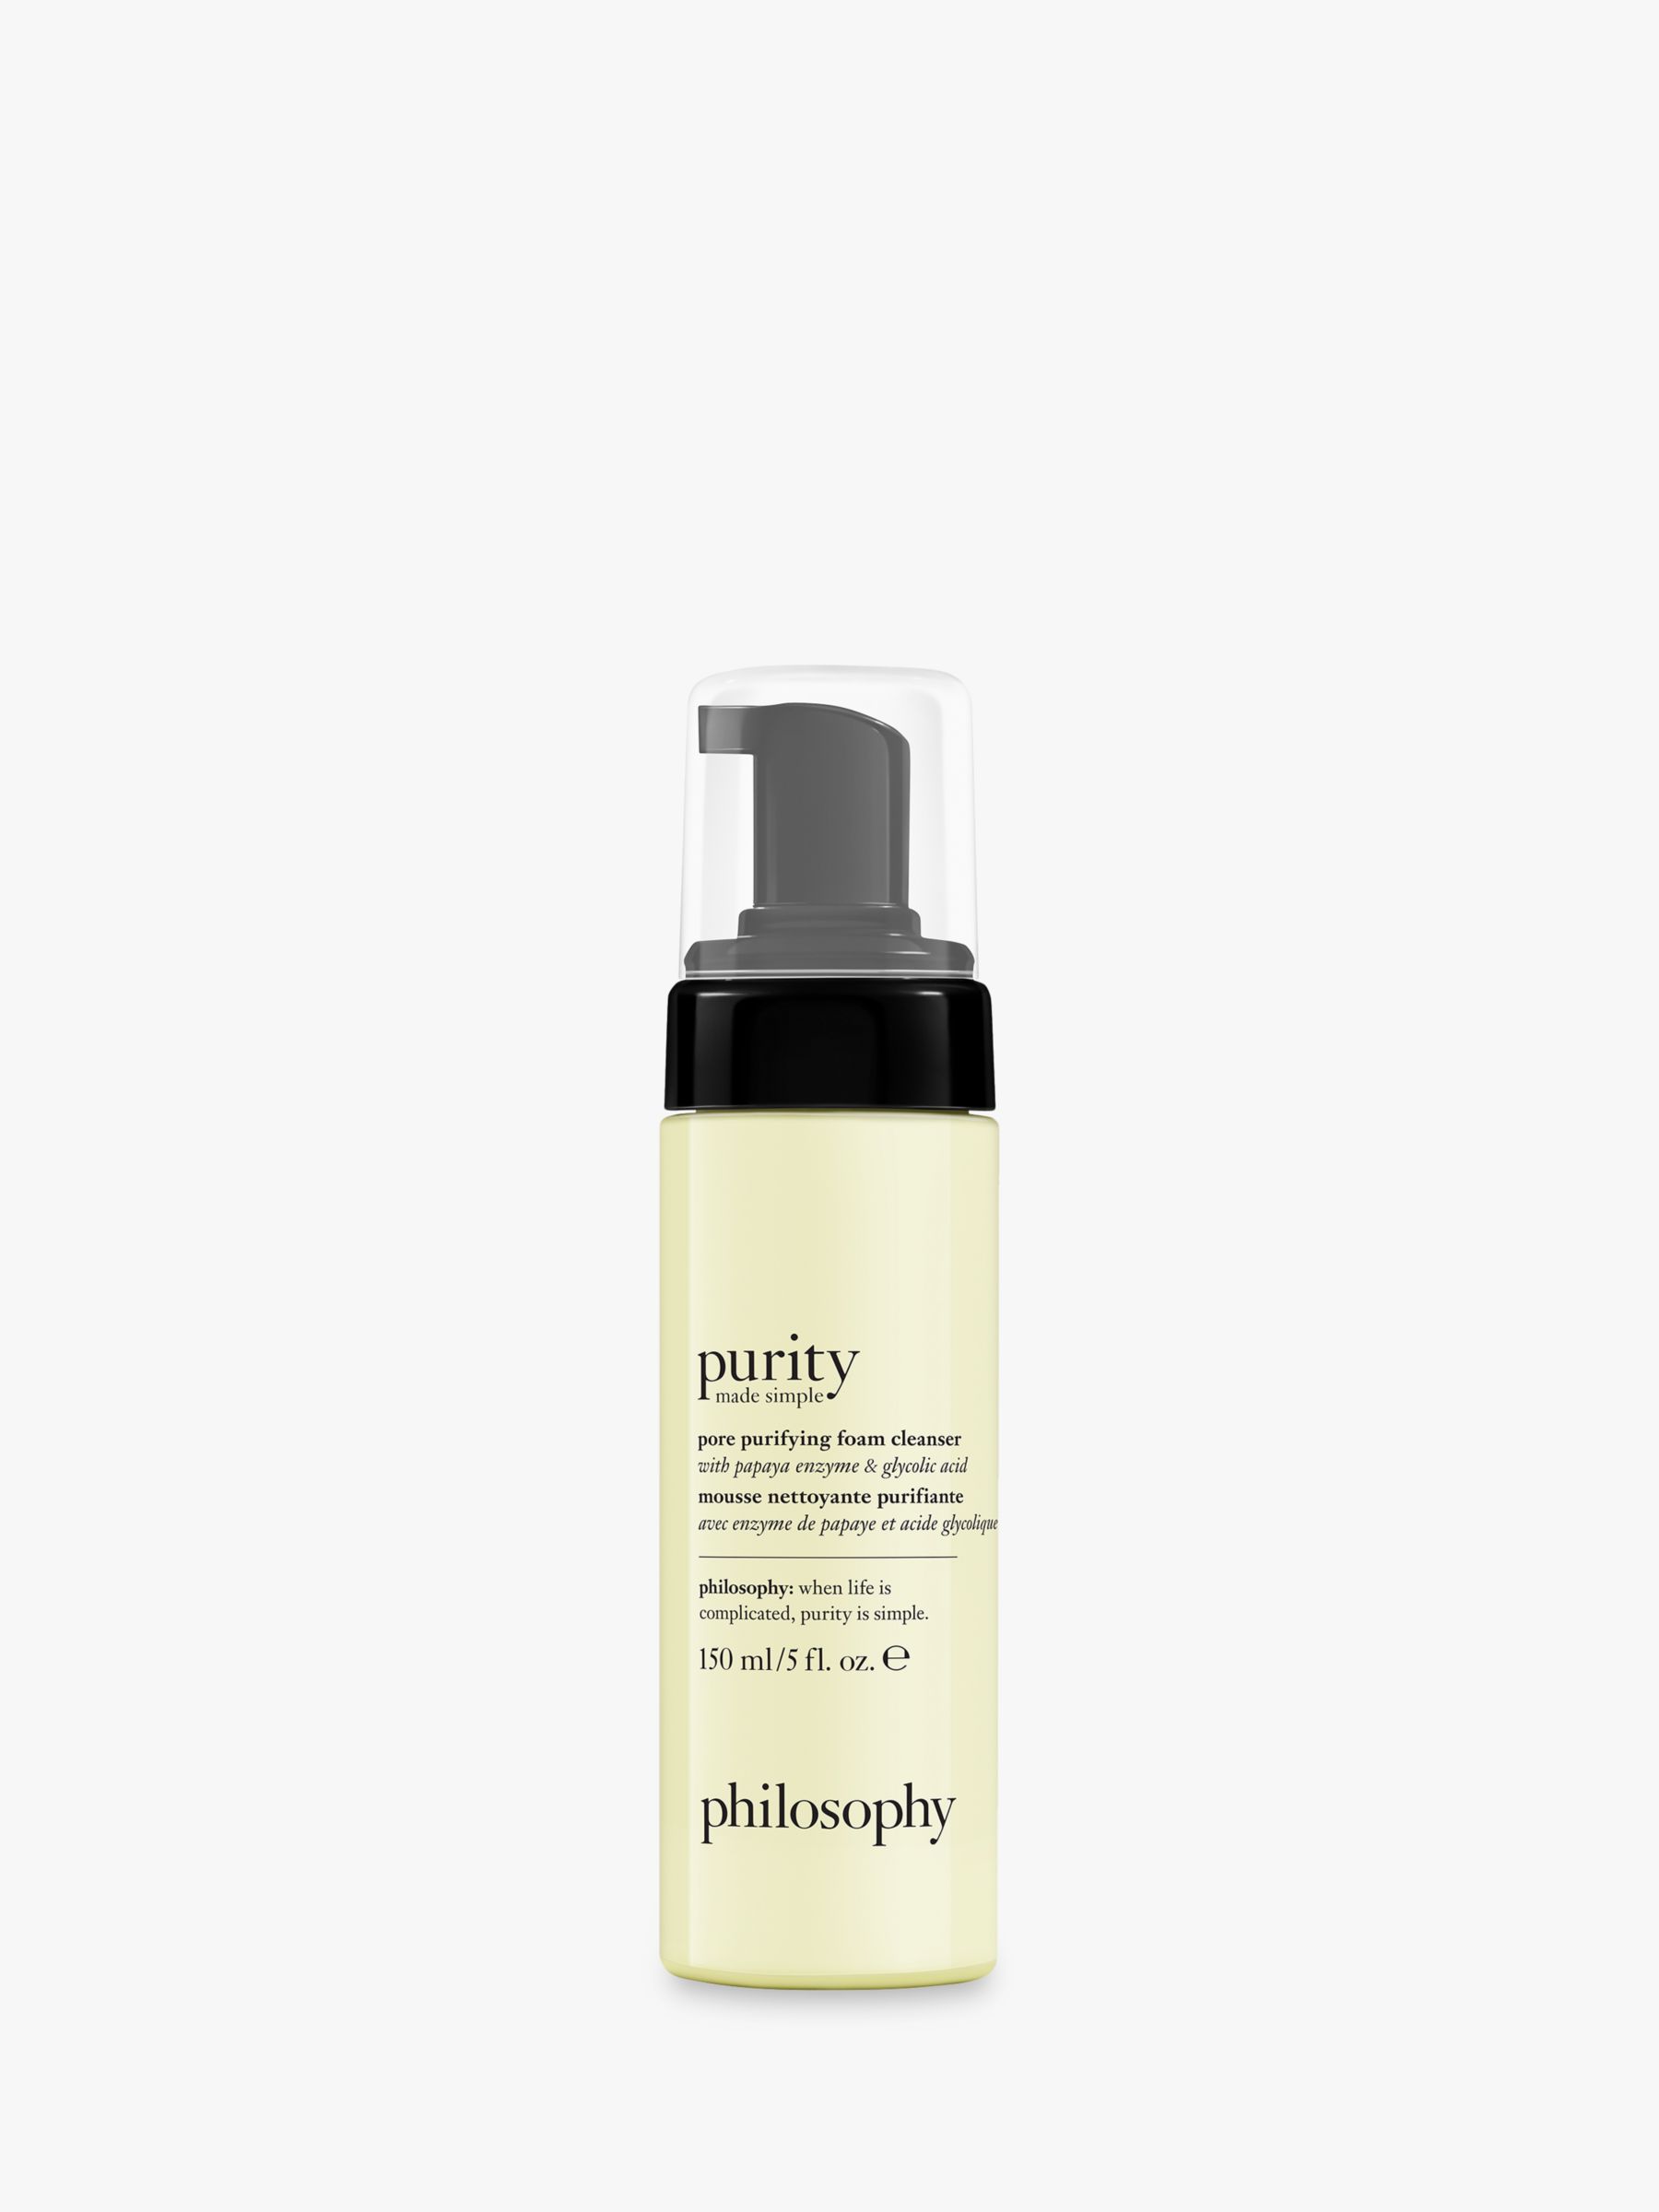 Philosophy Purity Made Simple Pore Purifying Facial Cleanser, 150ml 1